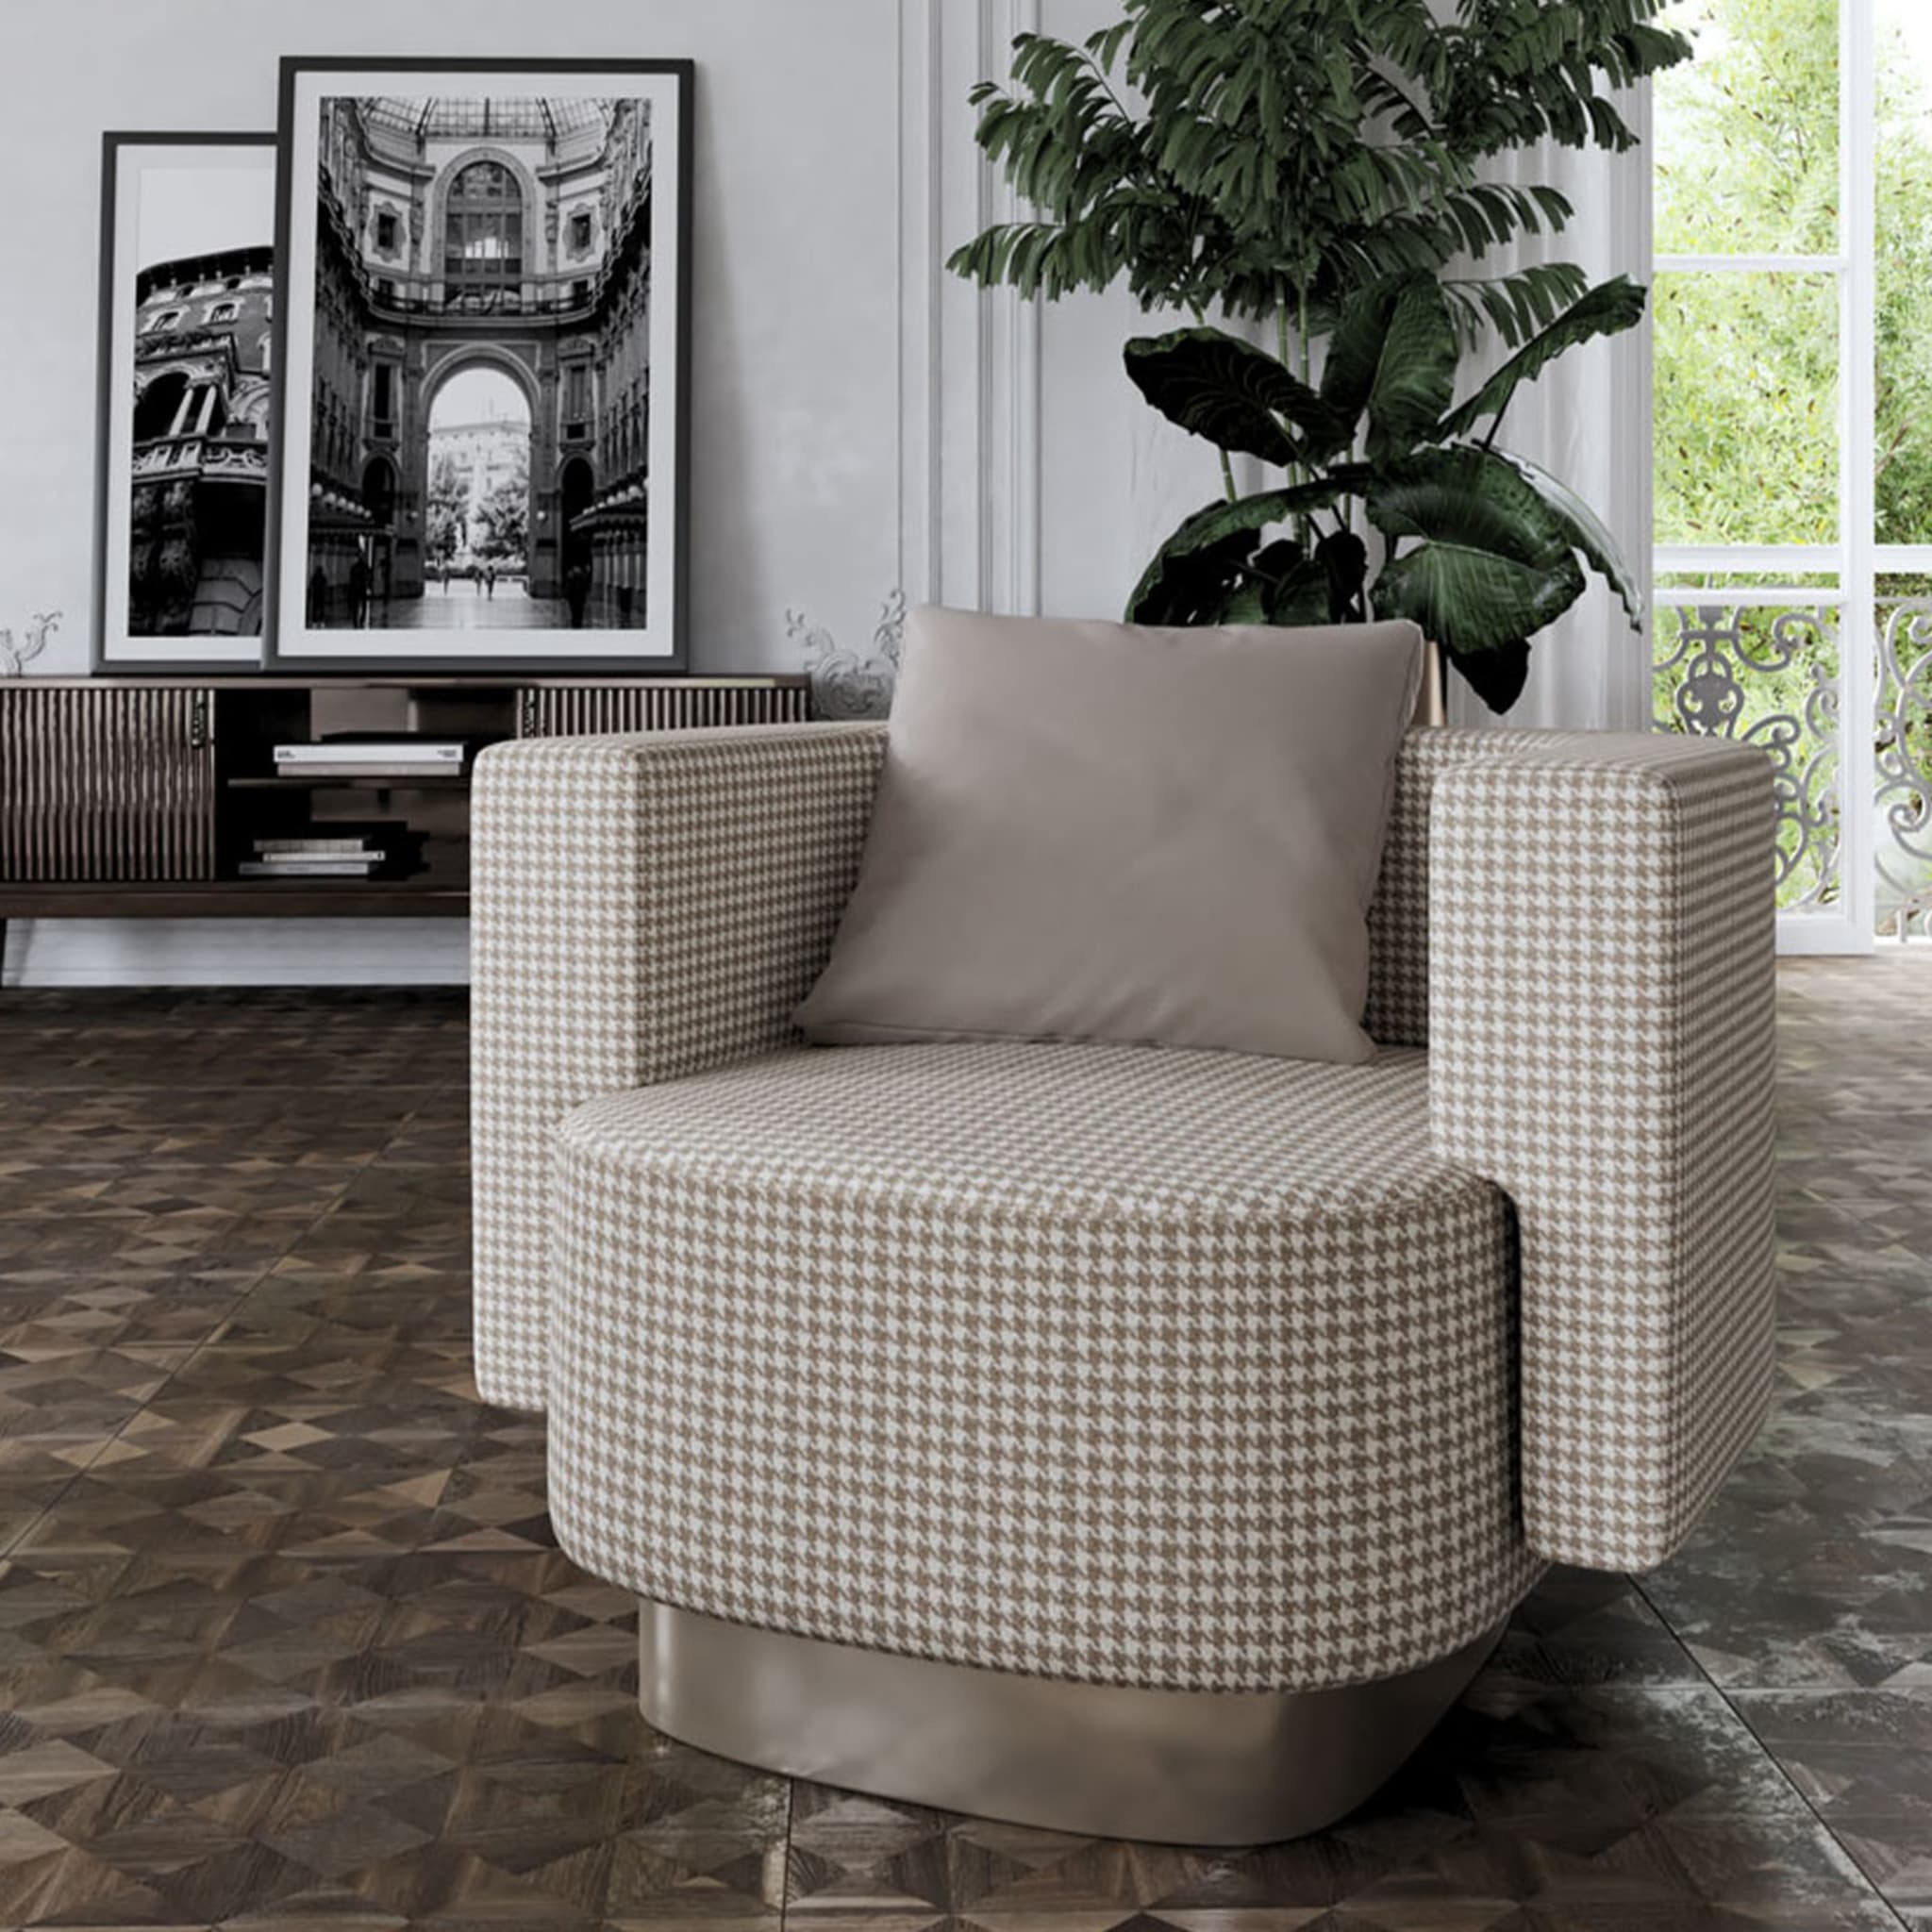  Italian Contemporary Lounge Upholstered Armchair  - Alternative view 4